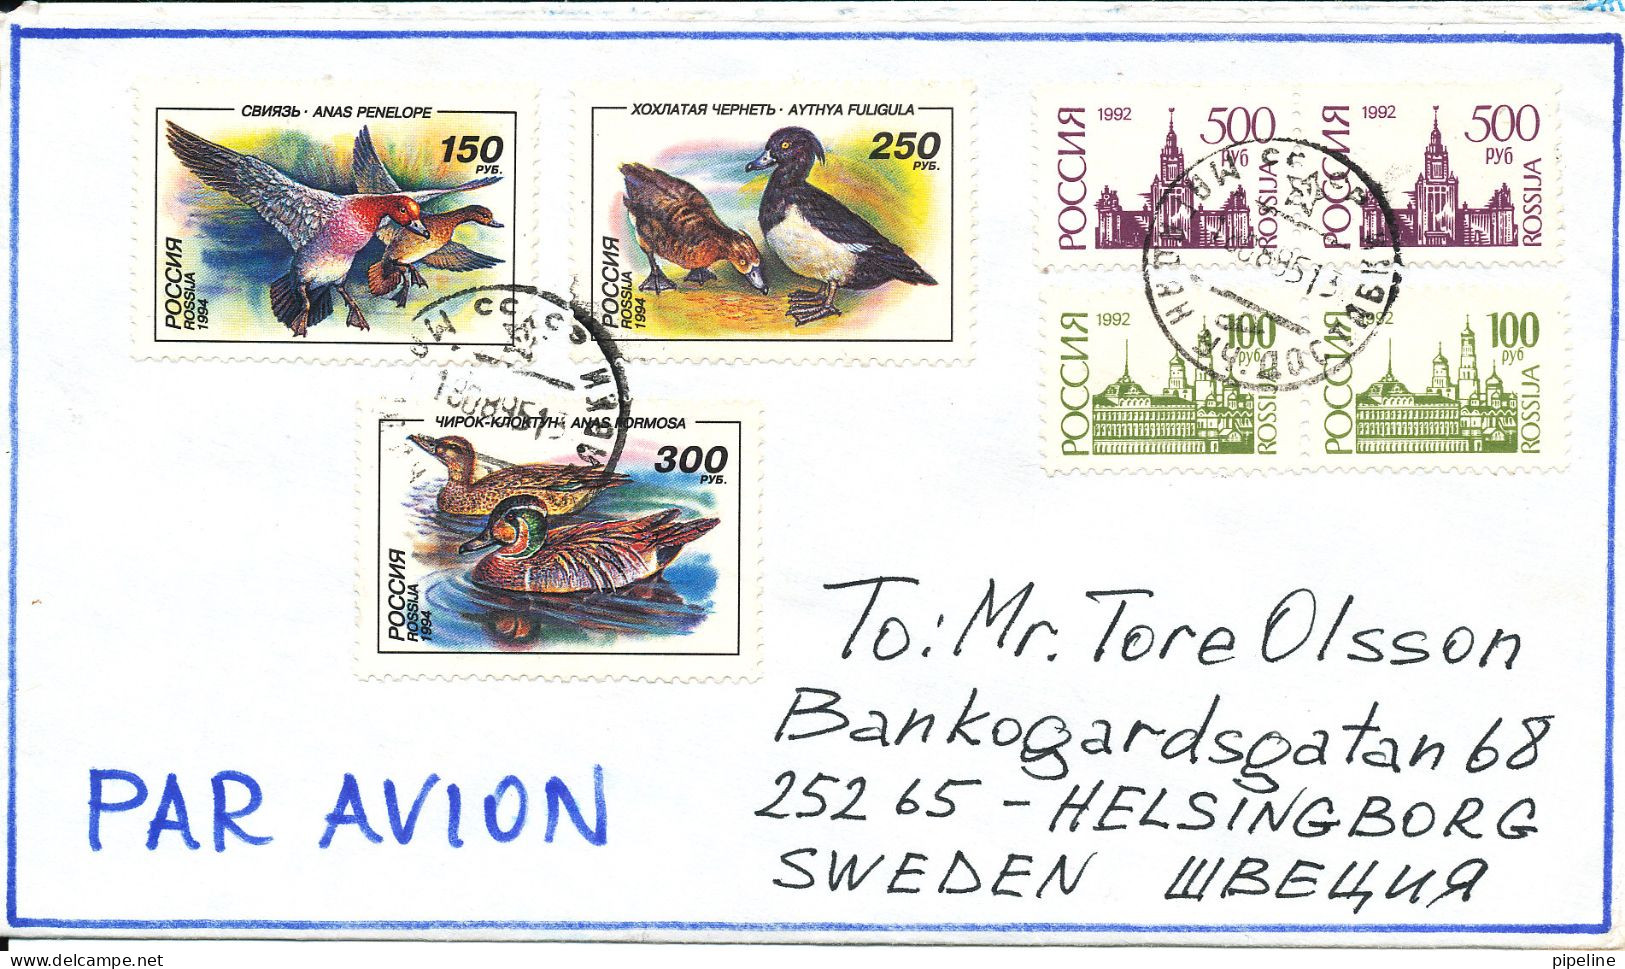 Russia Very Nice And Good Franked Cover Sent To Sweden 18-8-1995 - Brieven En Documenten